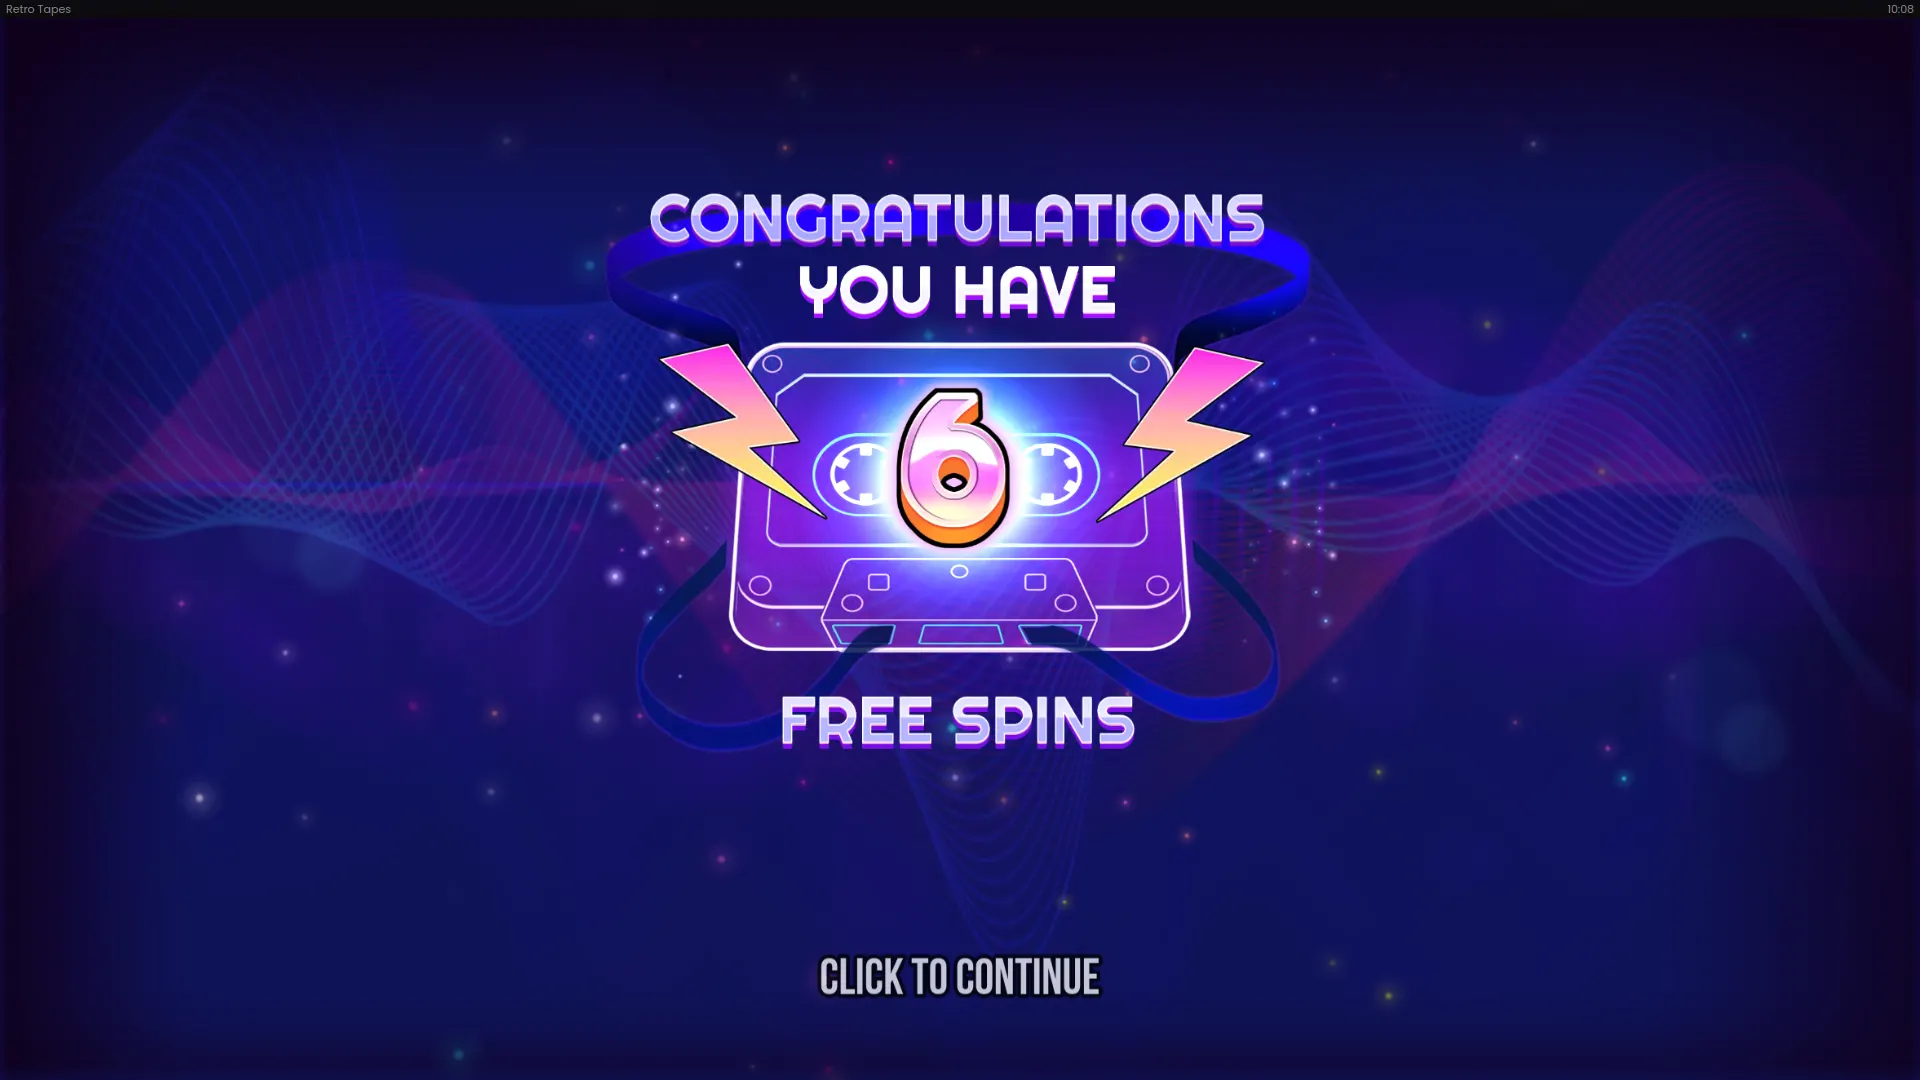 Retro Tapes Free Spins